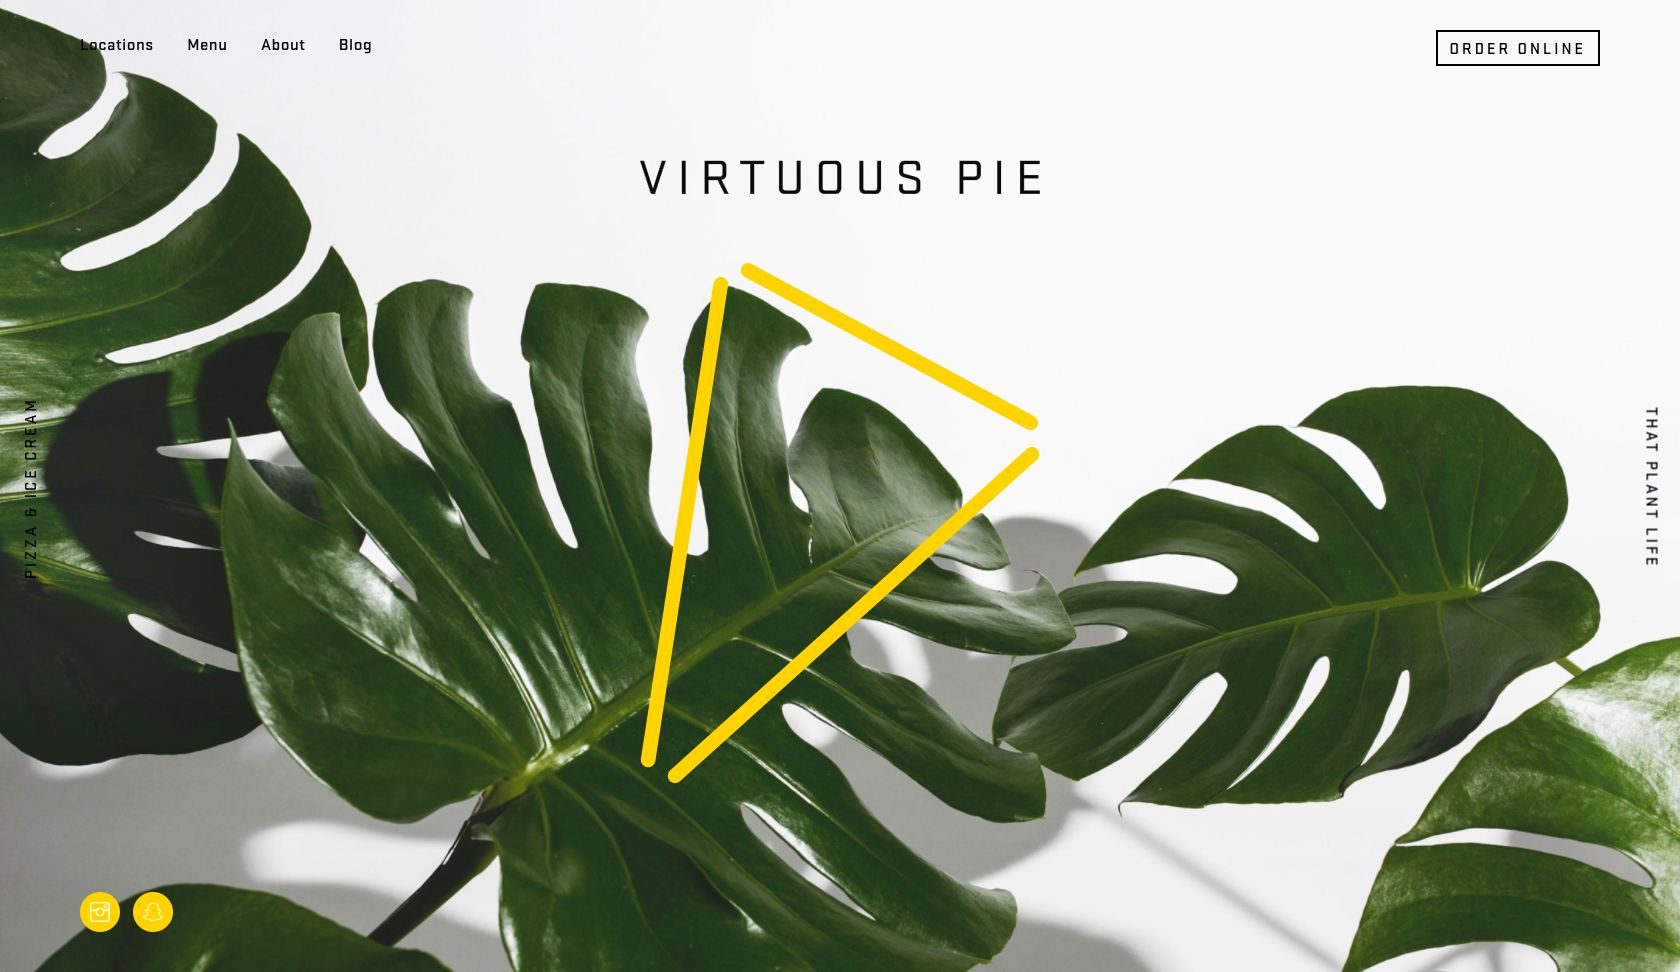 Virtuous Pie Website Home Page